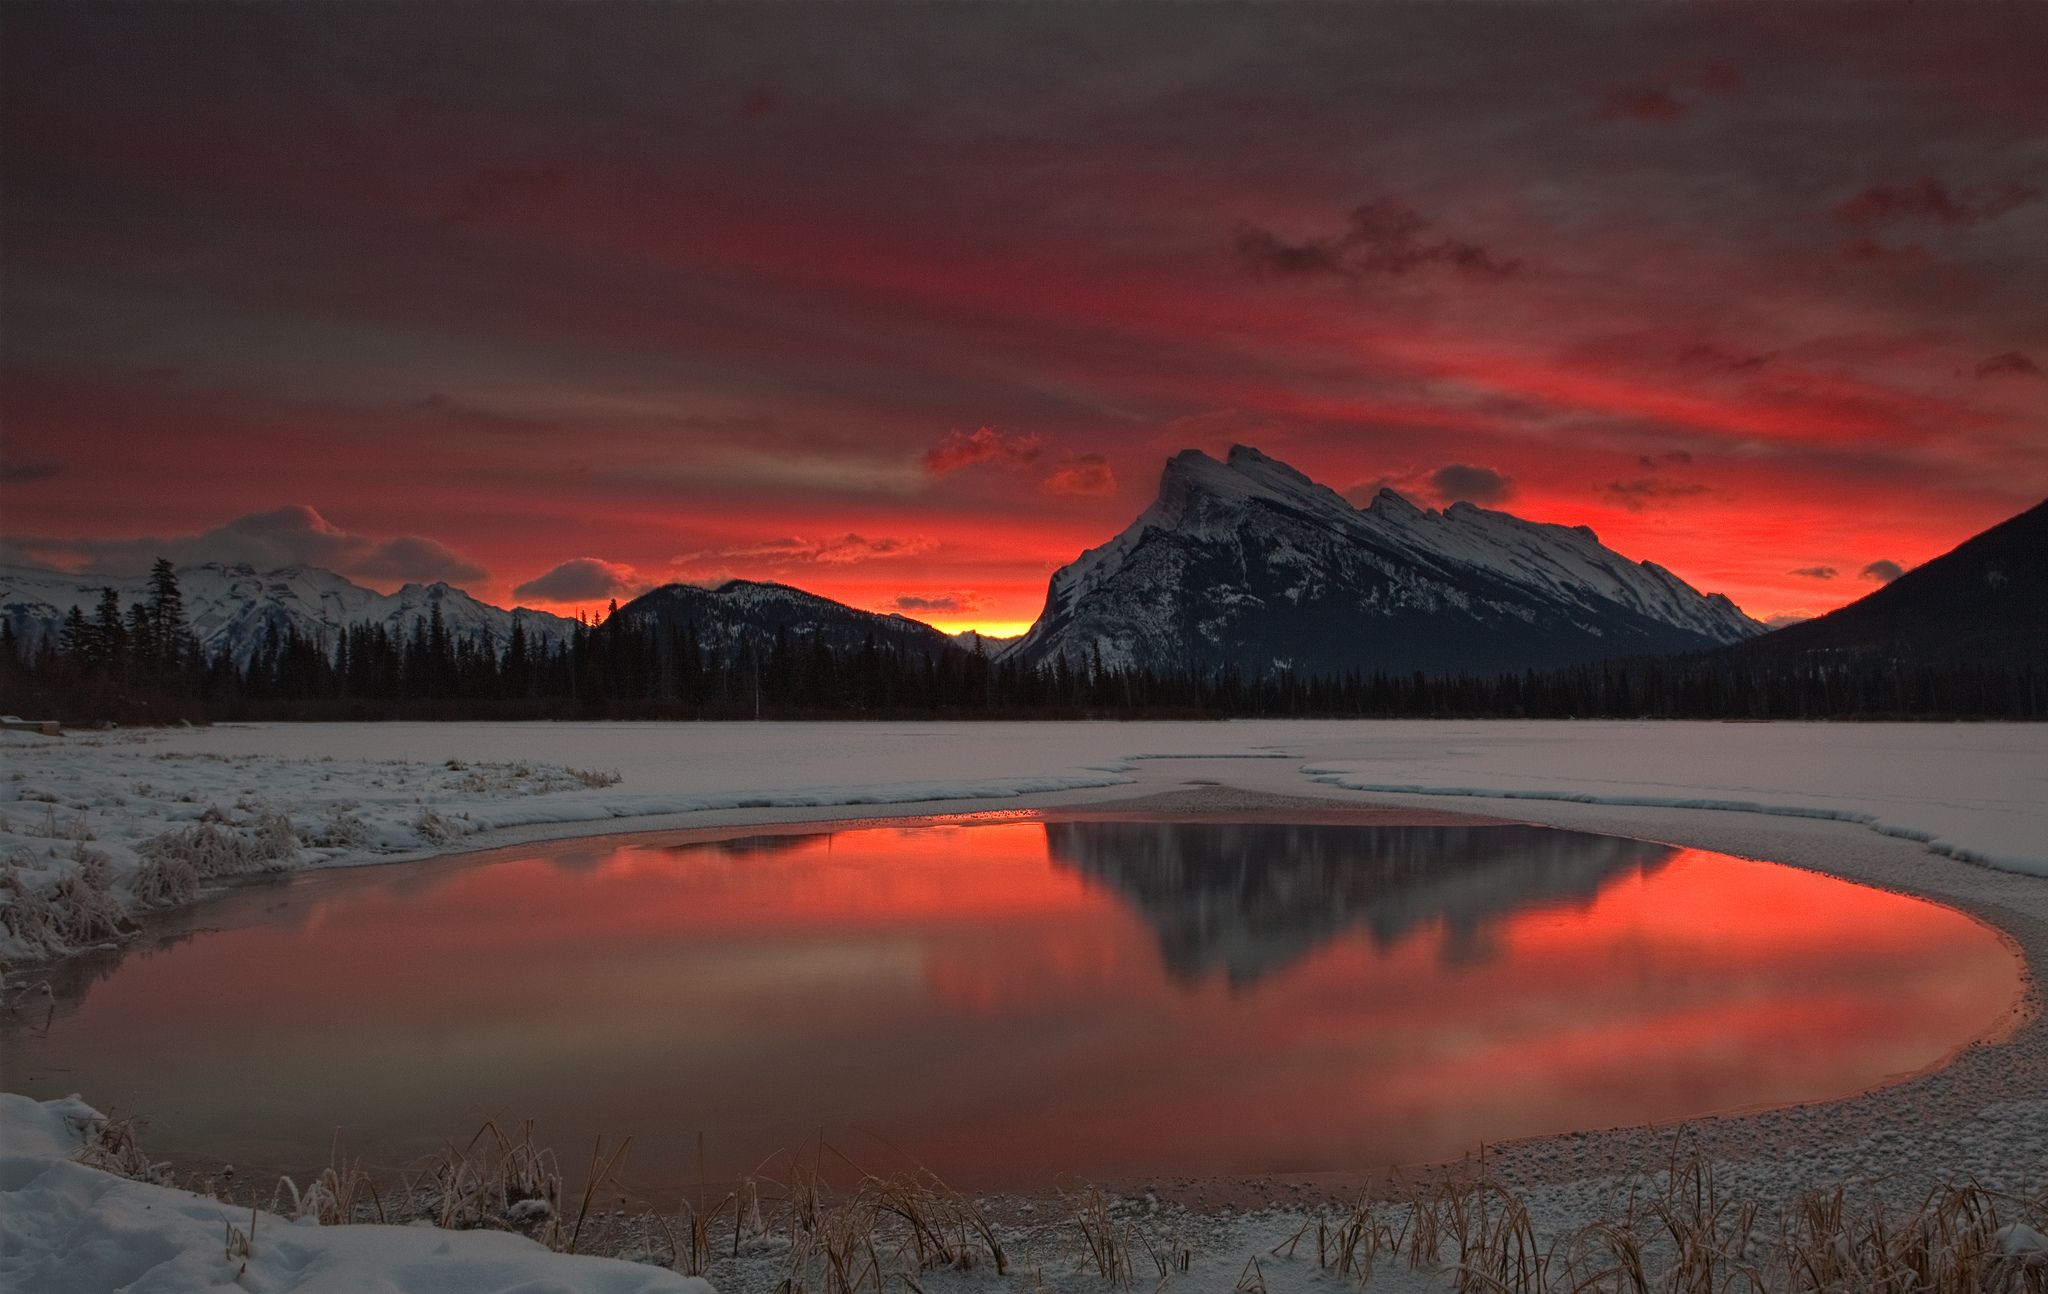 A red sky at night, shepherds delight. - Mountain, sunrise, lake